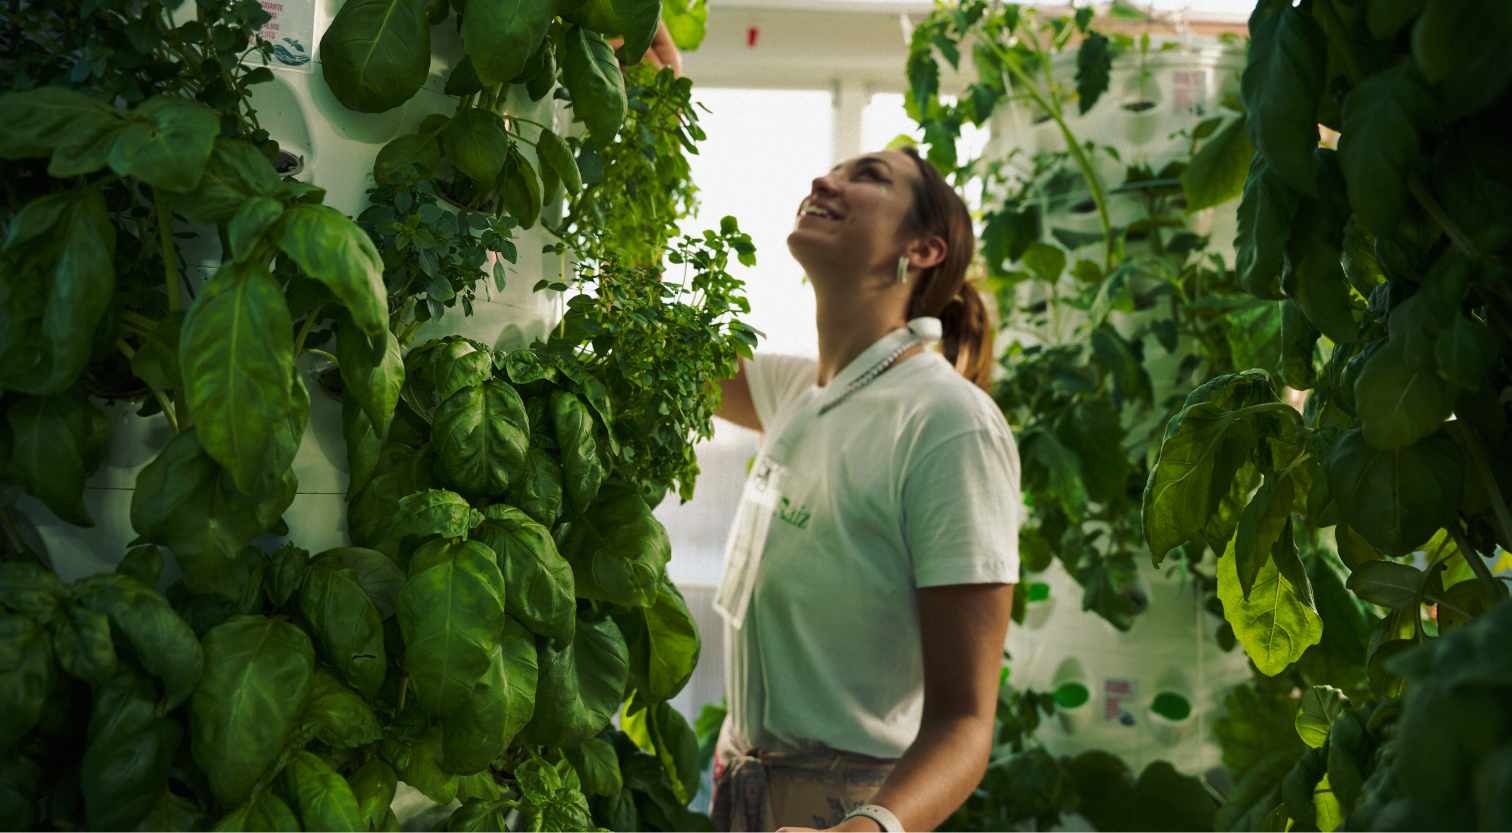 Image showcasing a vertical farming environment or setup with agronomist